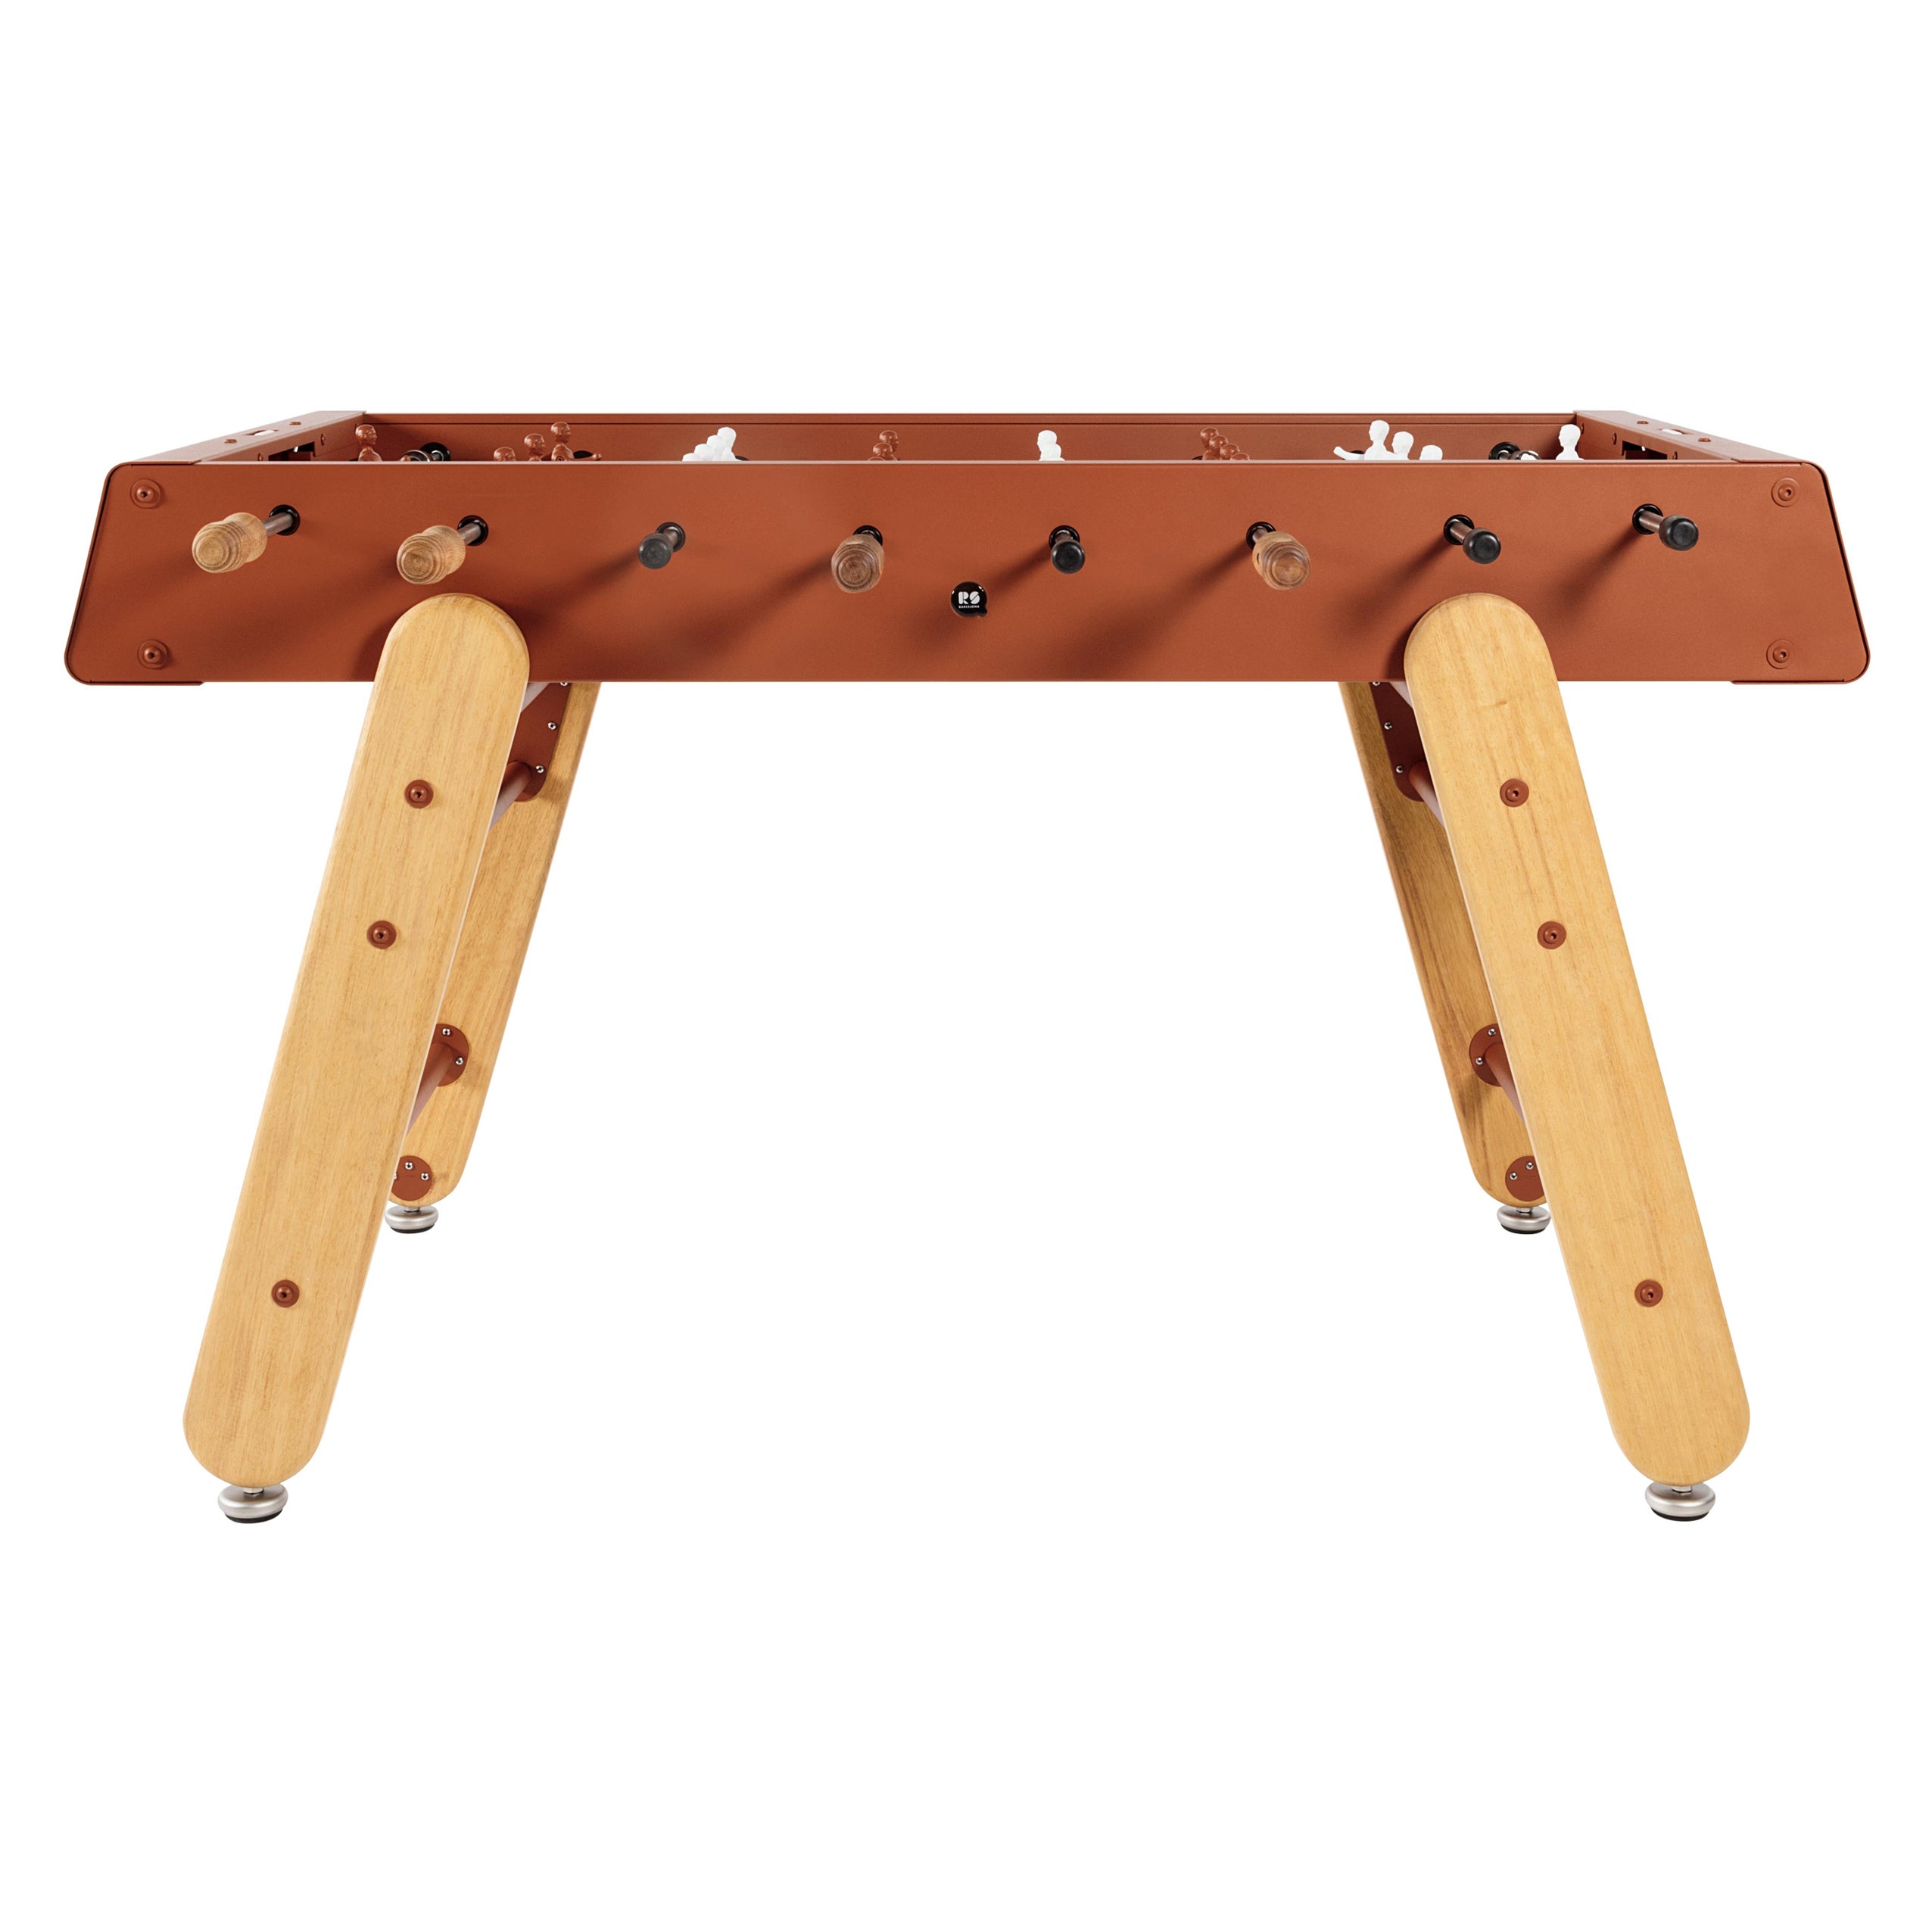 RS Barcelona RS4 Home Foosball Table in Terracotta For Sale